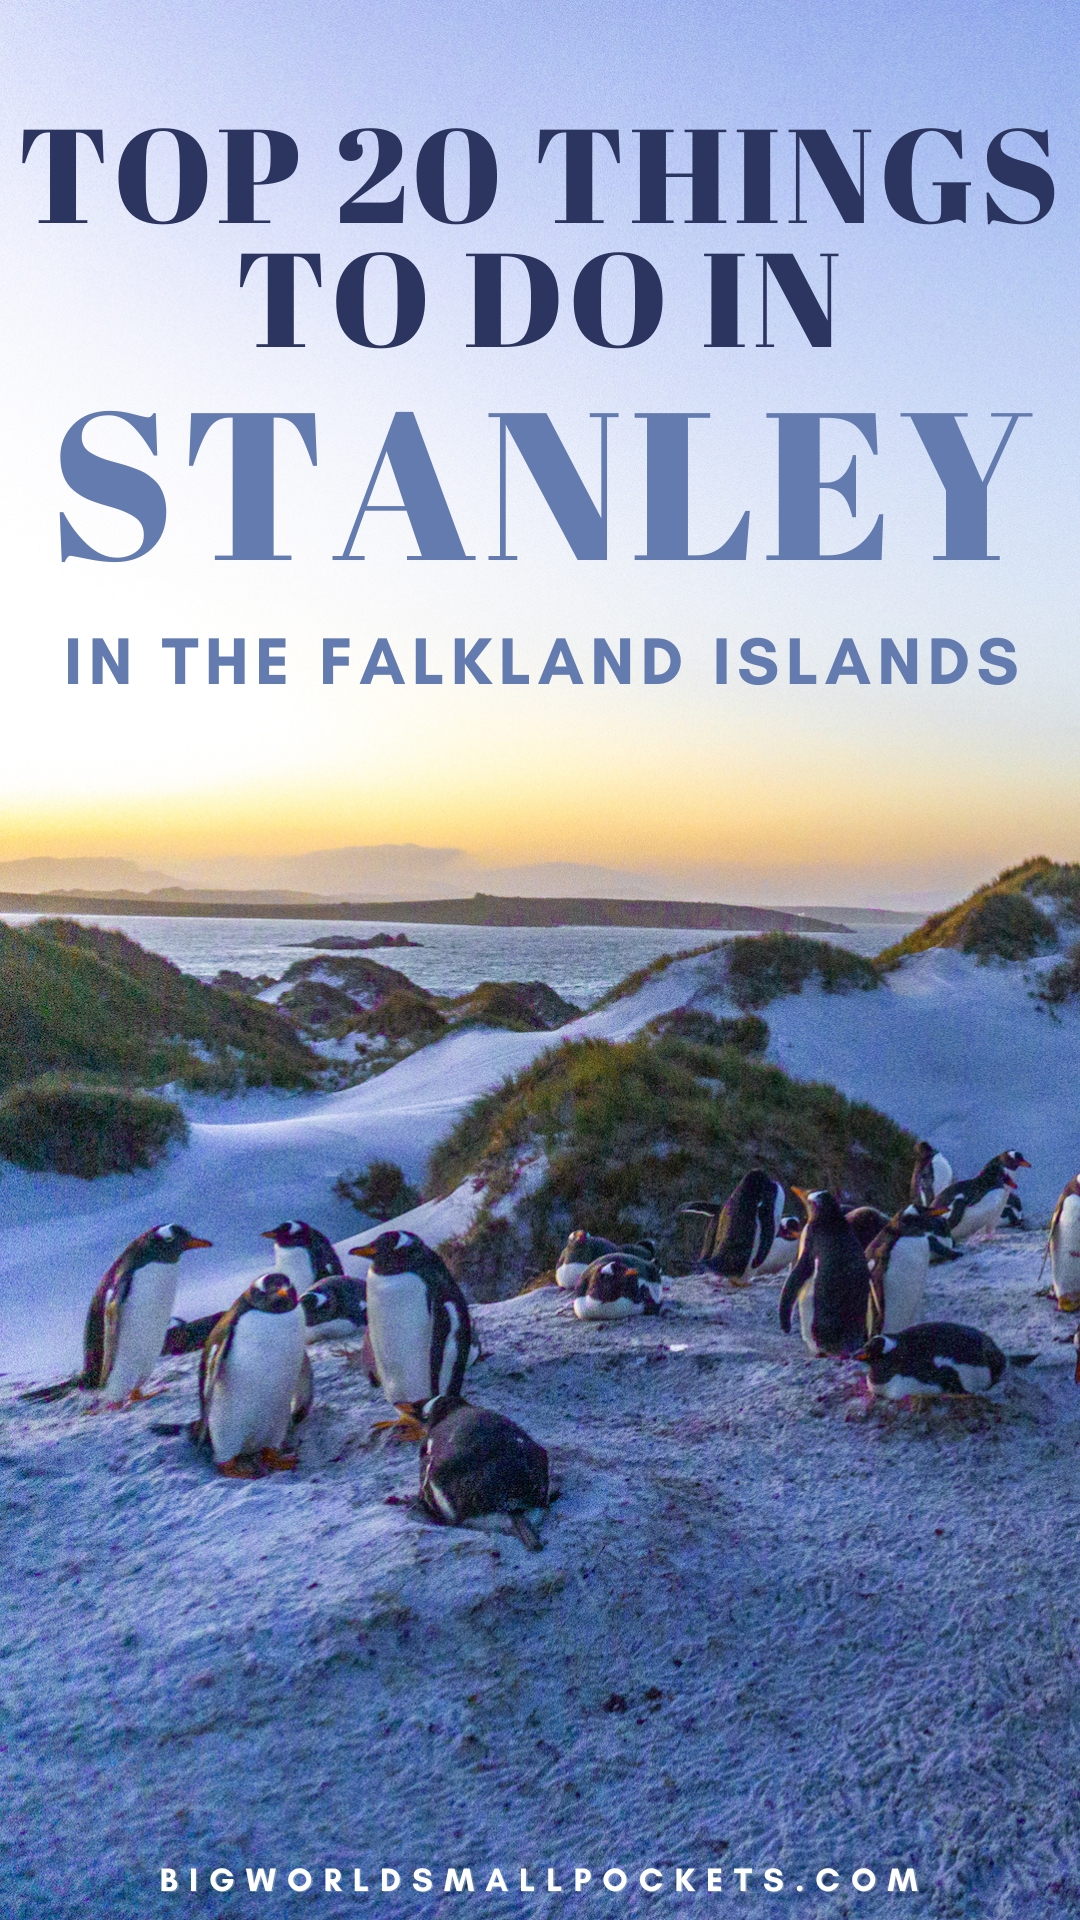 Top Things to Do in Stanley, Falkland Islands